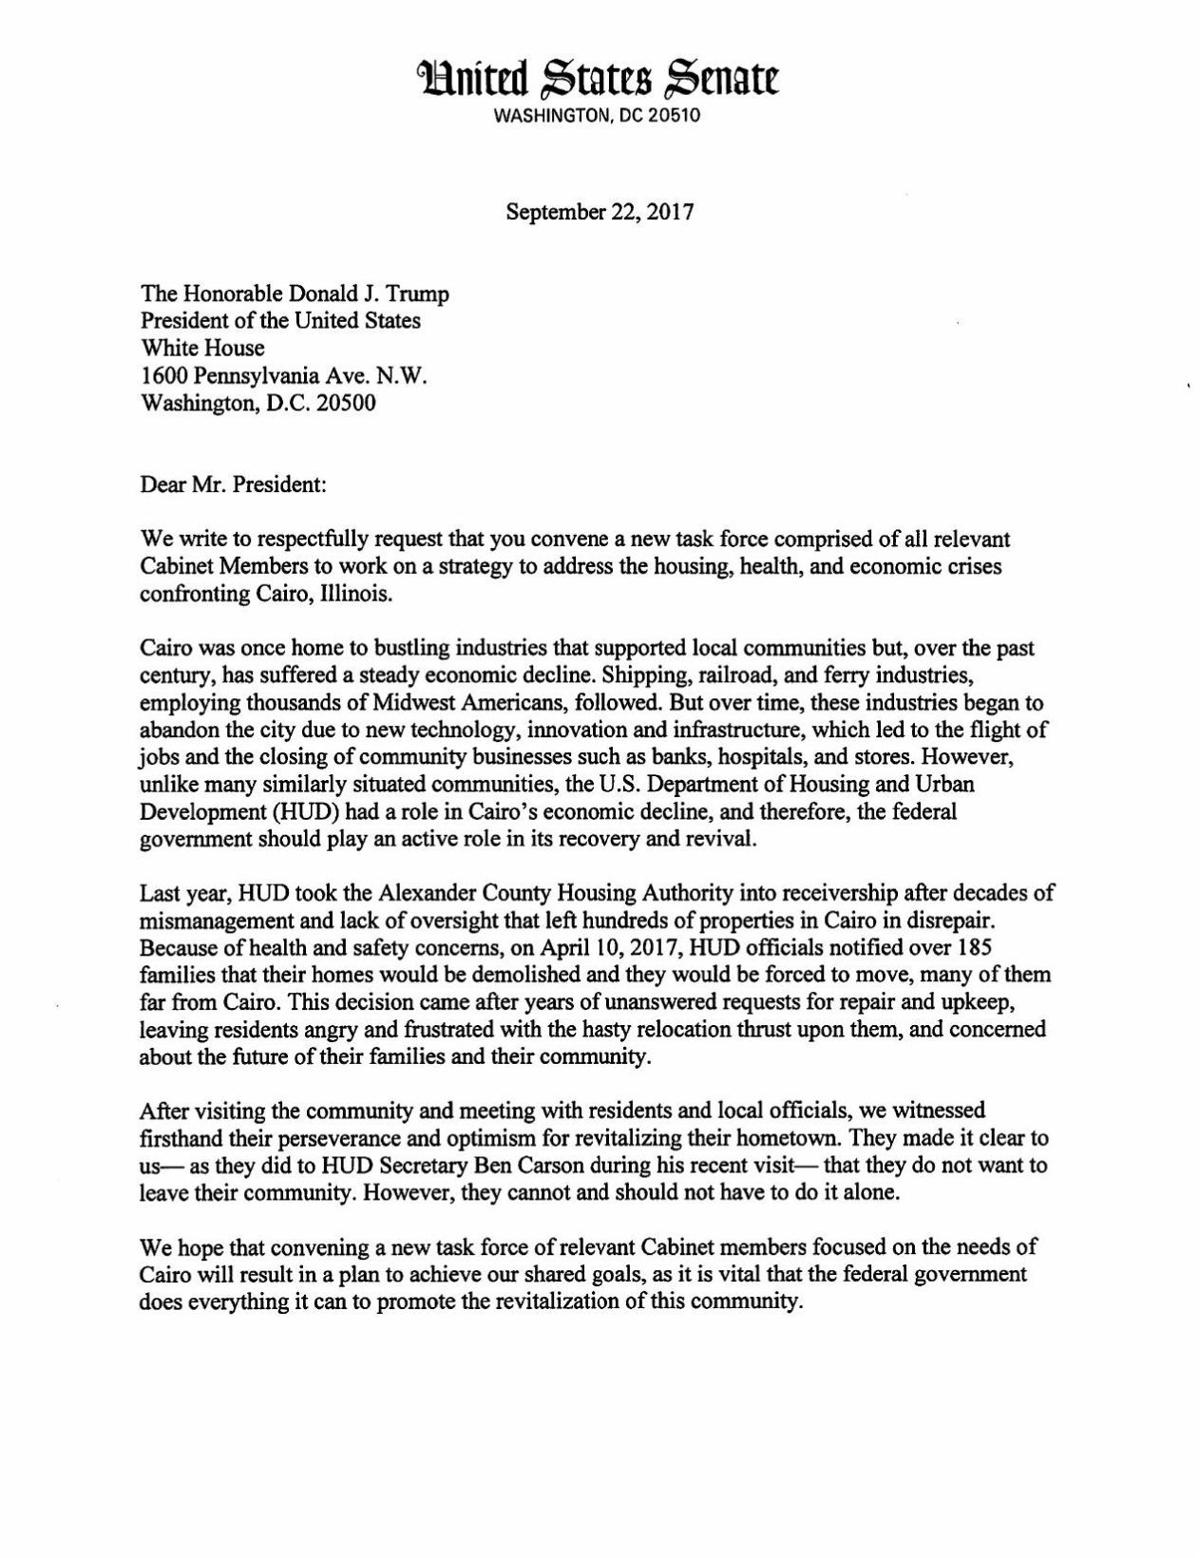 Read the full letter from Durbin and Duckworth asking Trump to